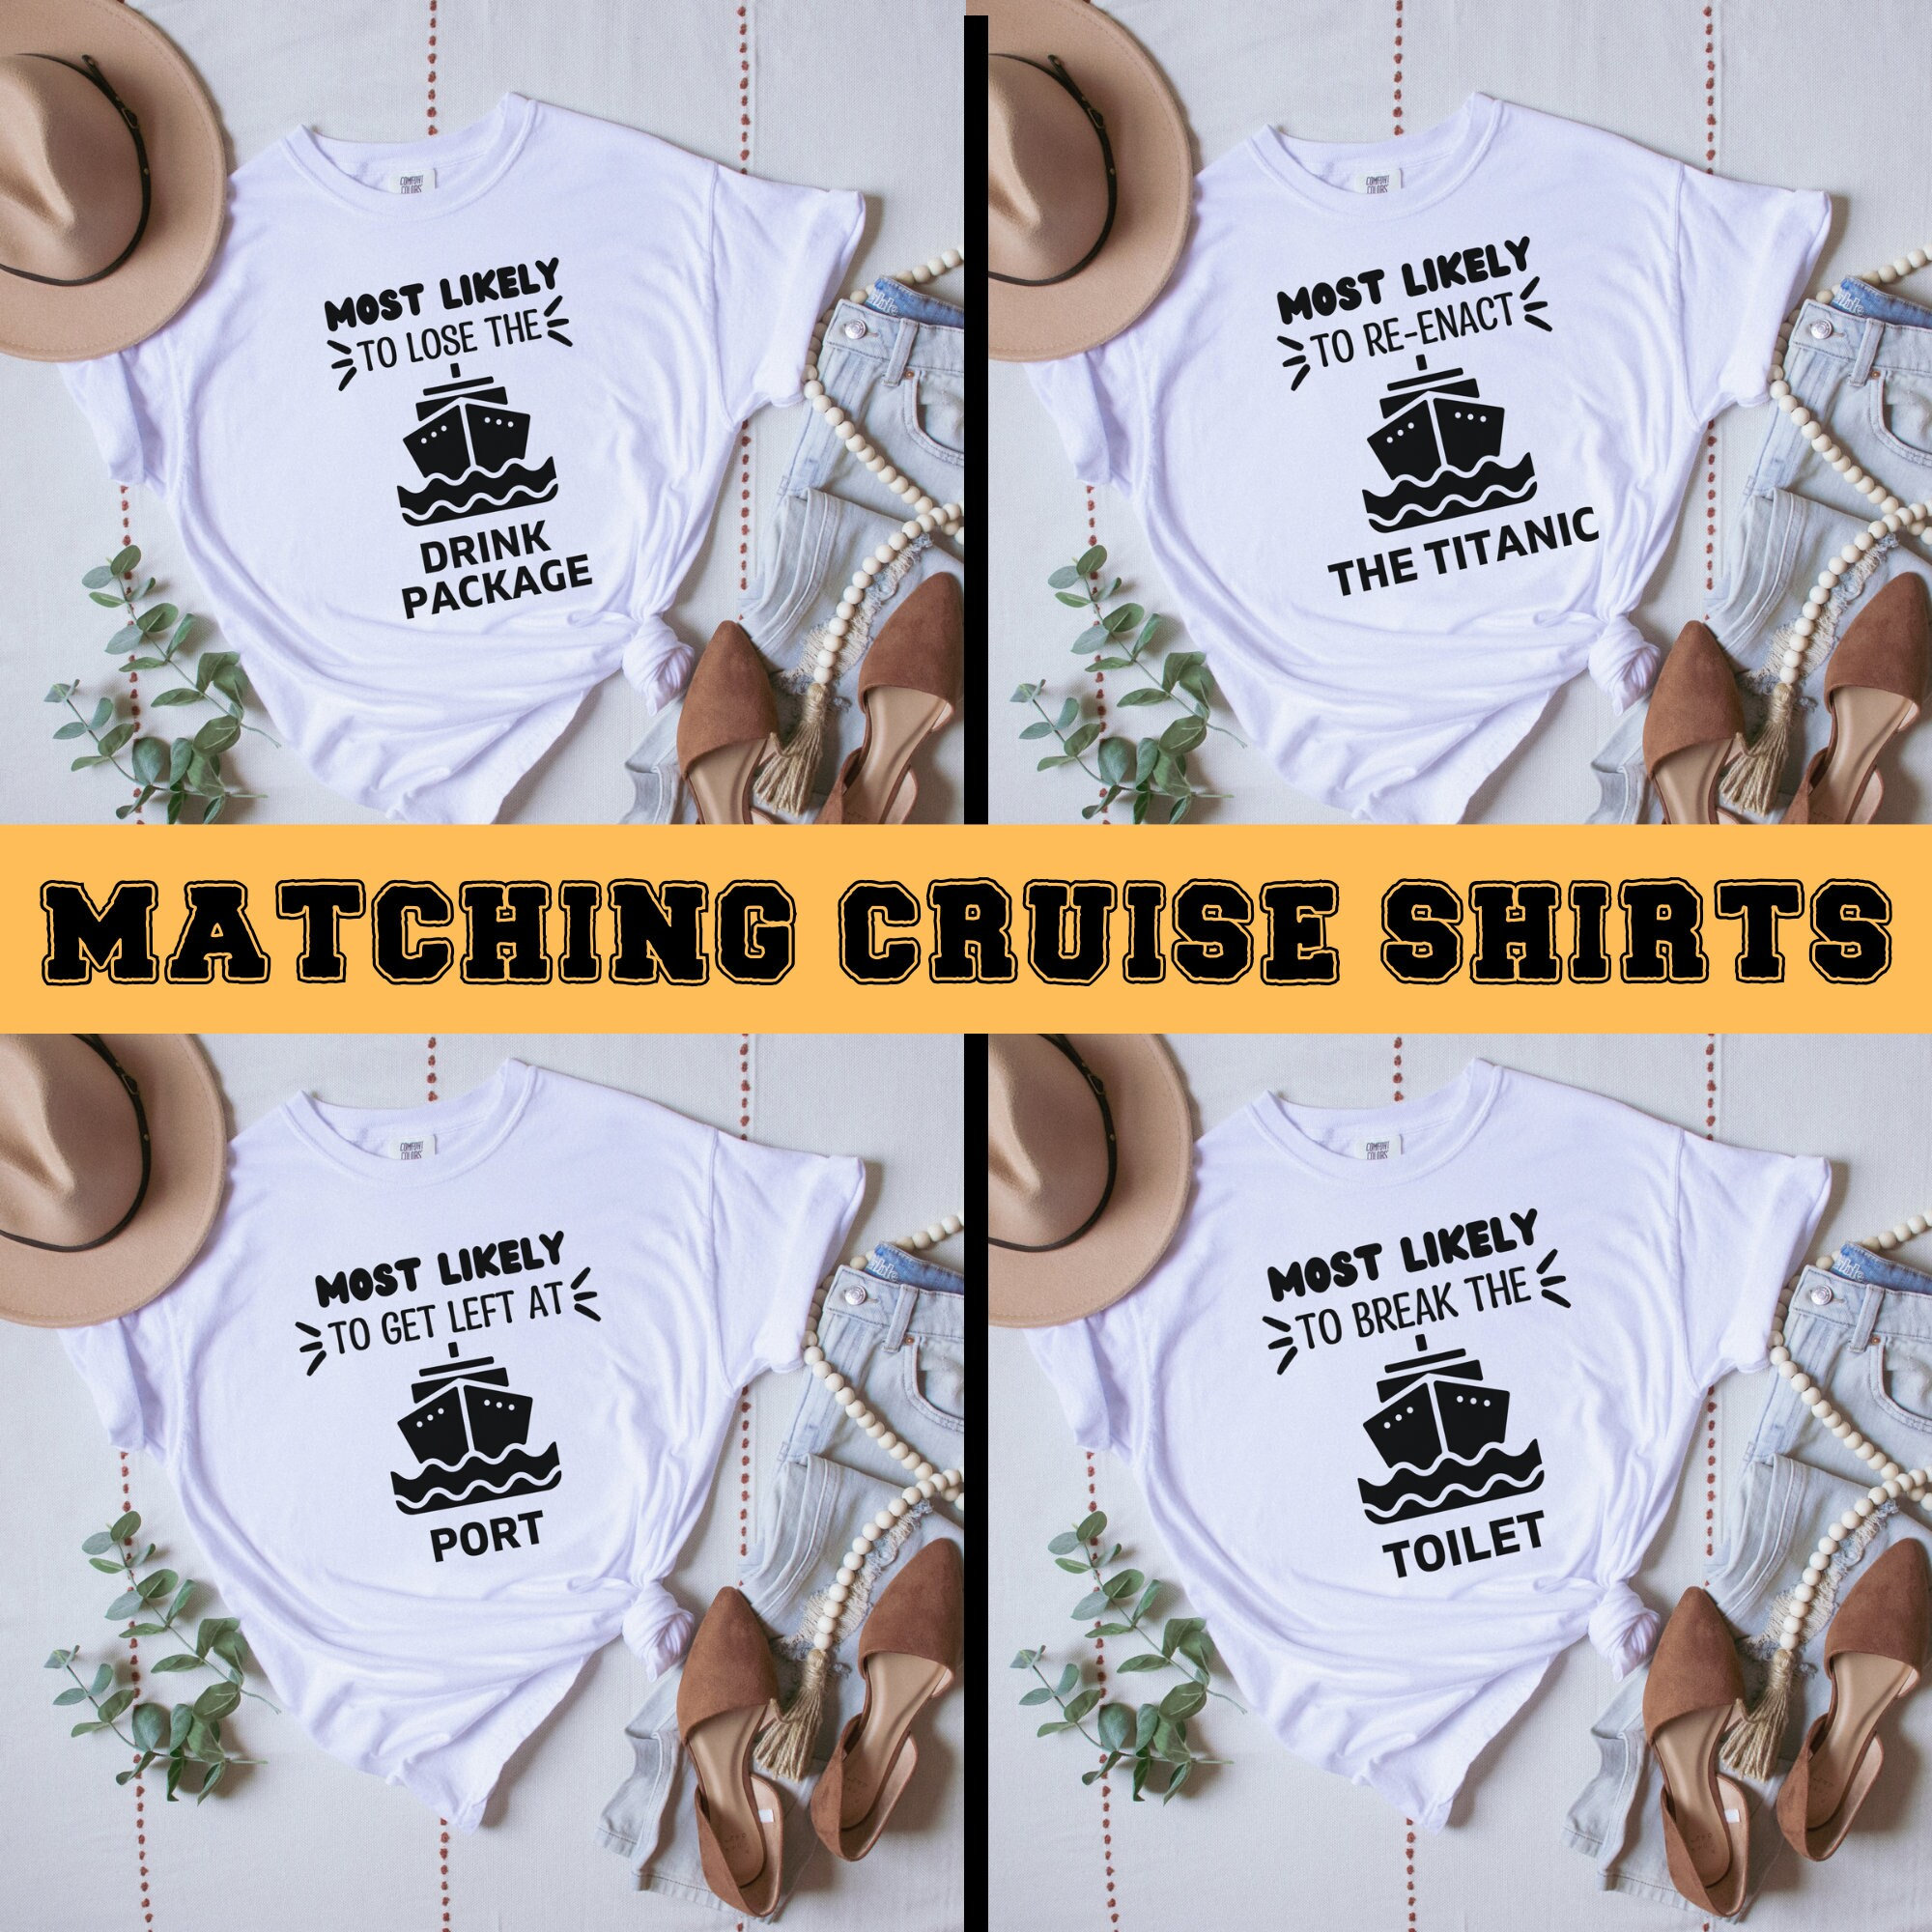 Most Likely to Cruise Shirts Funny Group Cruise Tshirt Girls 